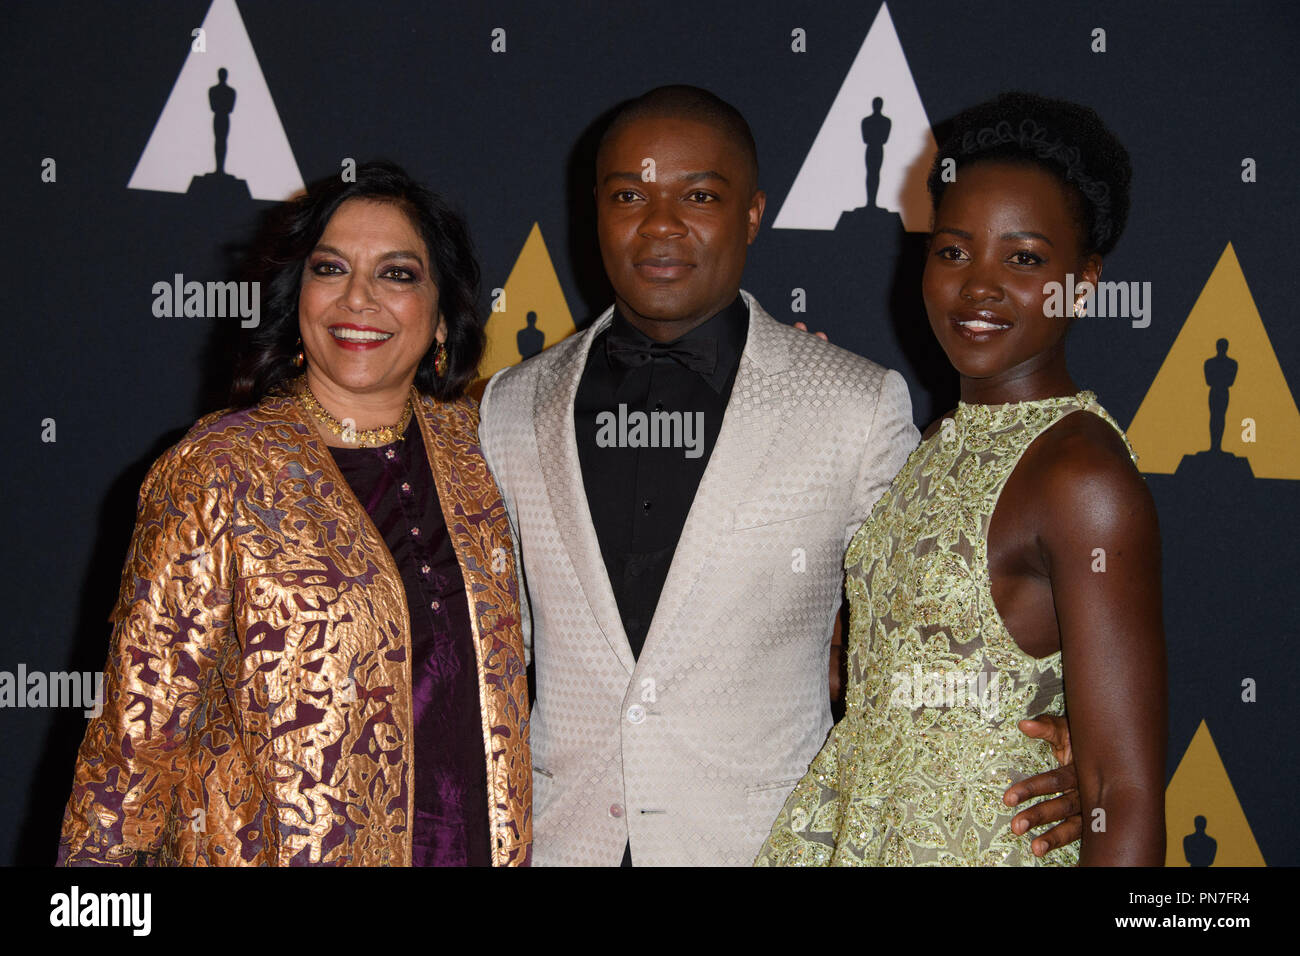 Mira Nair (left), David Oyelowo, Lupita Nyong'o attend the Academy’s 8th Annual Governors Awards in The Ray Dolby Ballroom at Hollywood & Highland Center® in Hollywood, CA, on Saturday, November 12, 2016.  File Reference # 33153 078THA  For Editorial Use Only -  All Rights Reserved Stock Photo